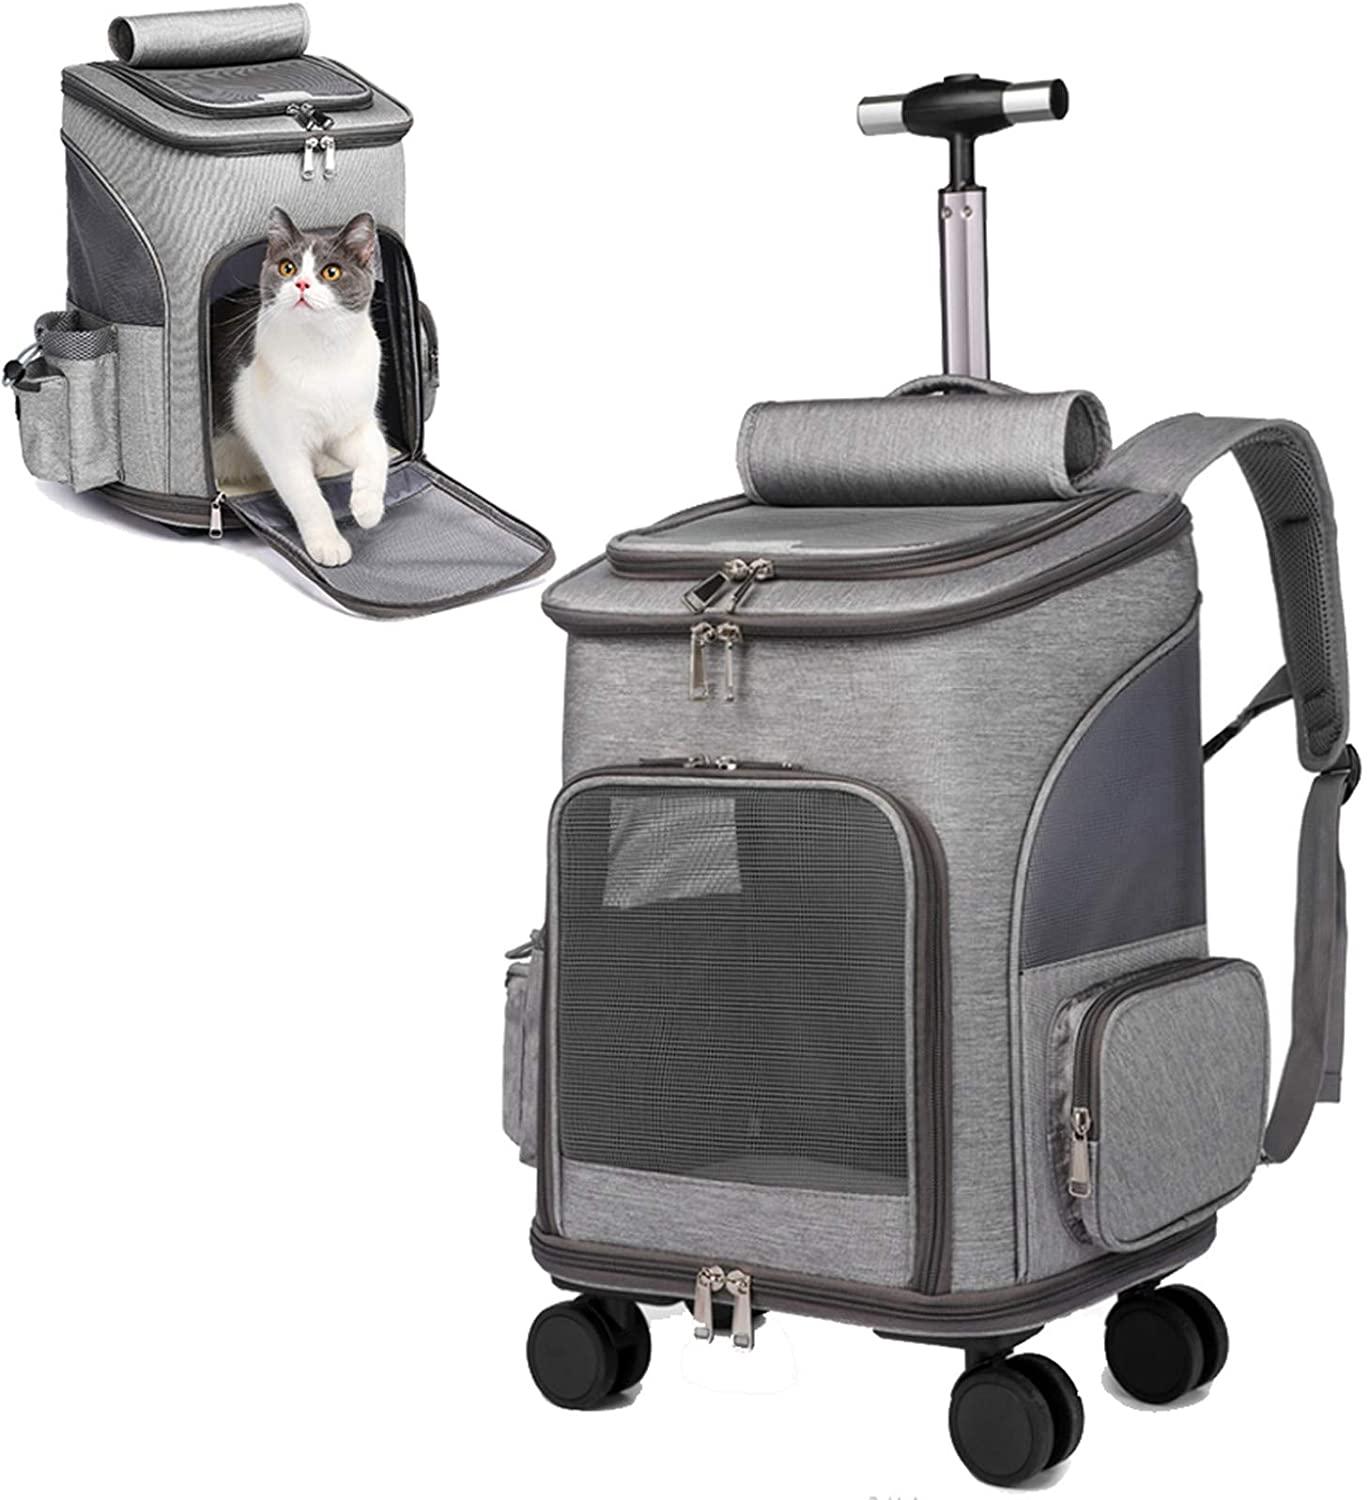 FREE SAMPLE Wheeled Pet Carrier Backpack Pet Stroller Travel Carrier Car Seat for Dogs Cats Puppy Comfort Cat Backpack